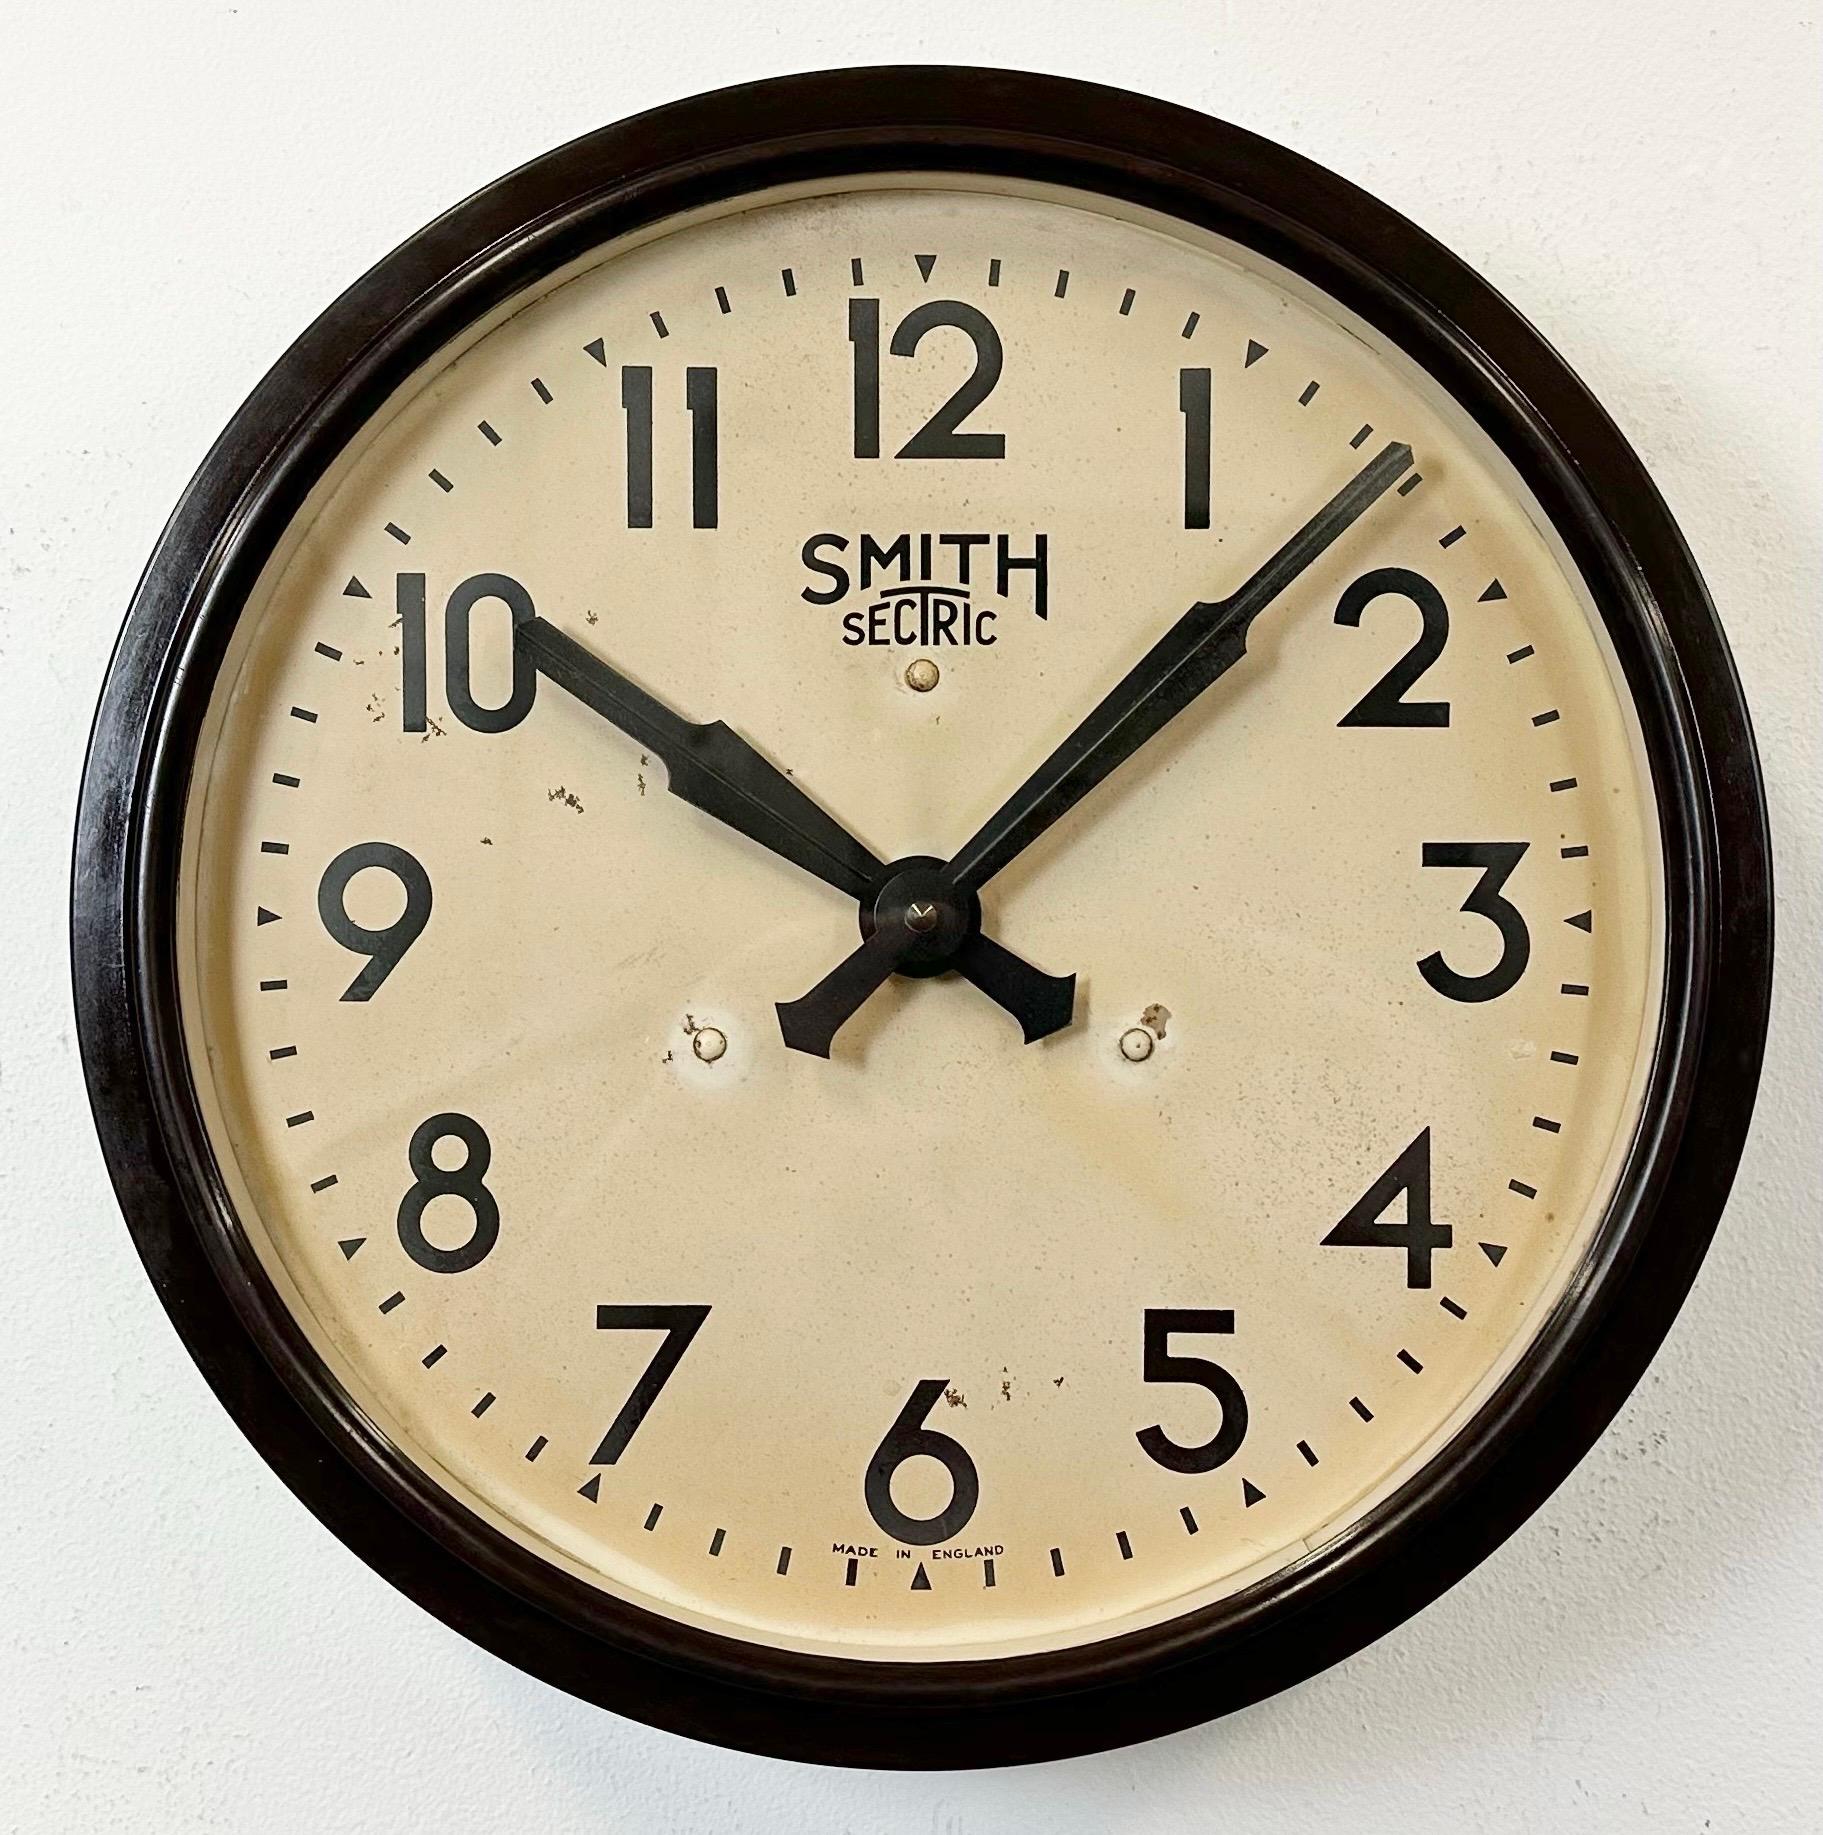 smiths sectric clocks 1940s